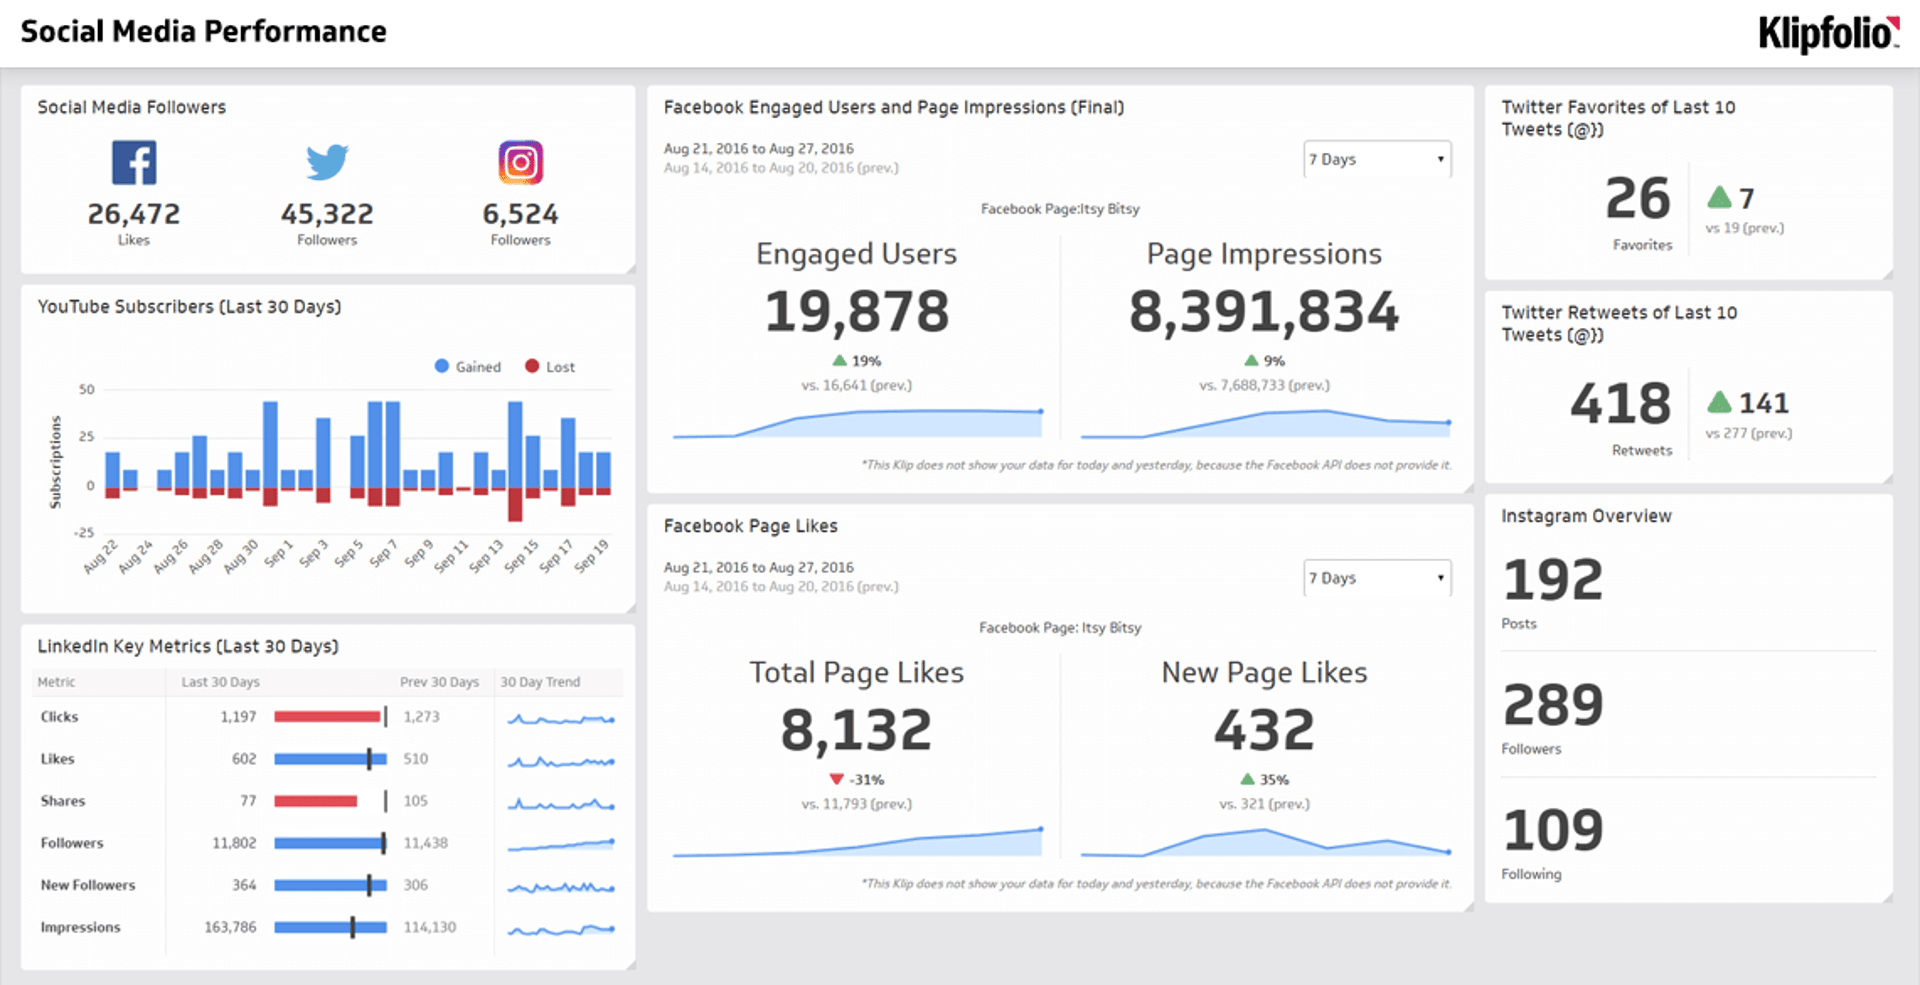 Related Dashboard Examples - Social Media Performance Dashboard